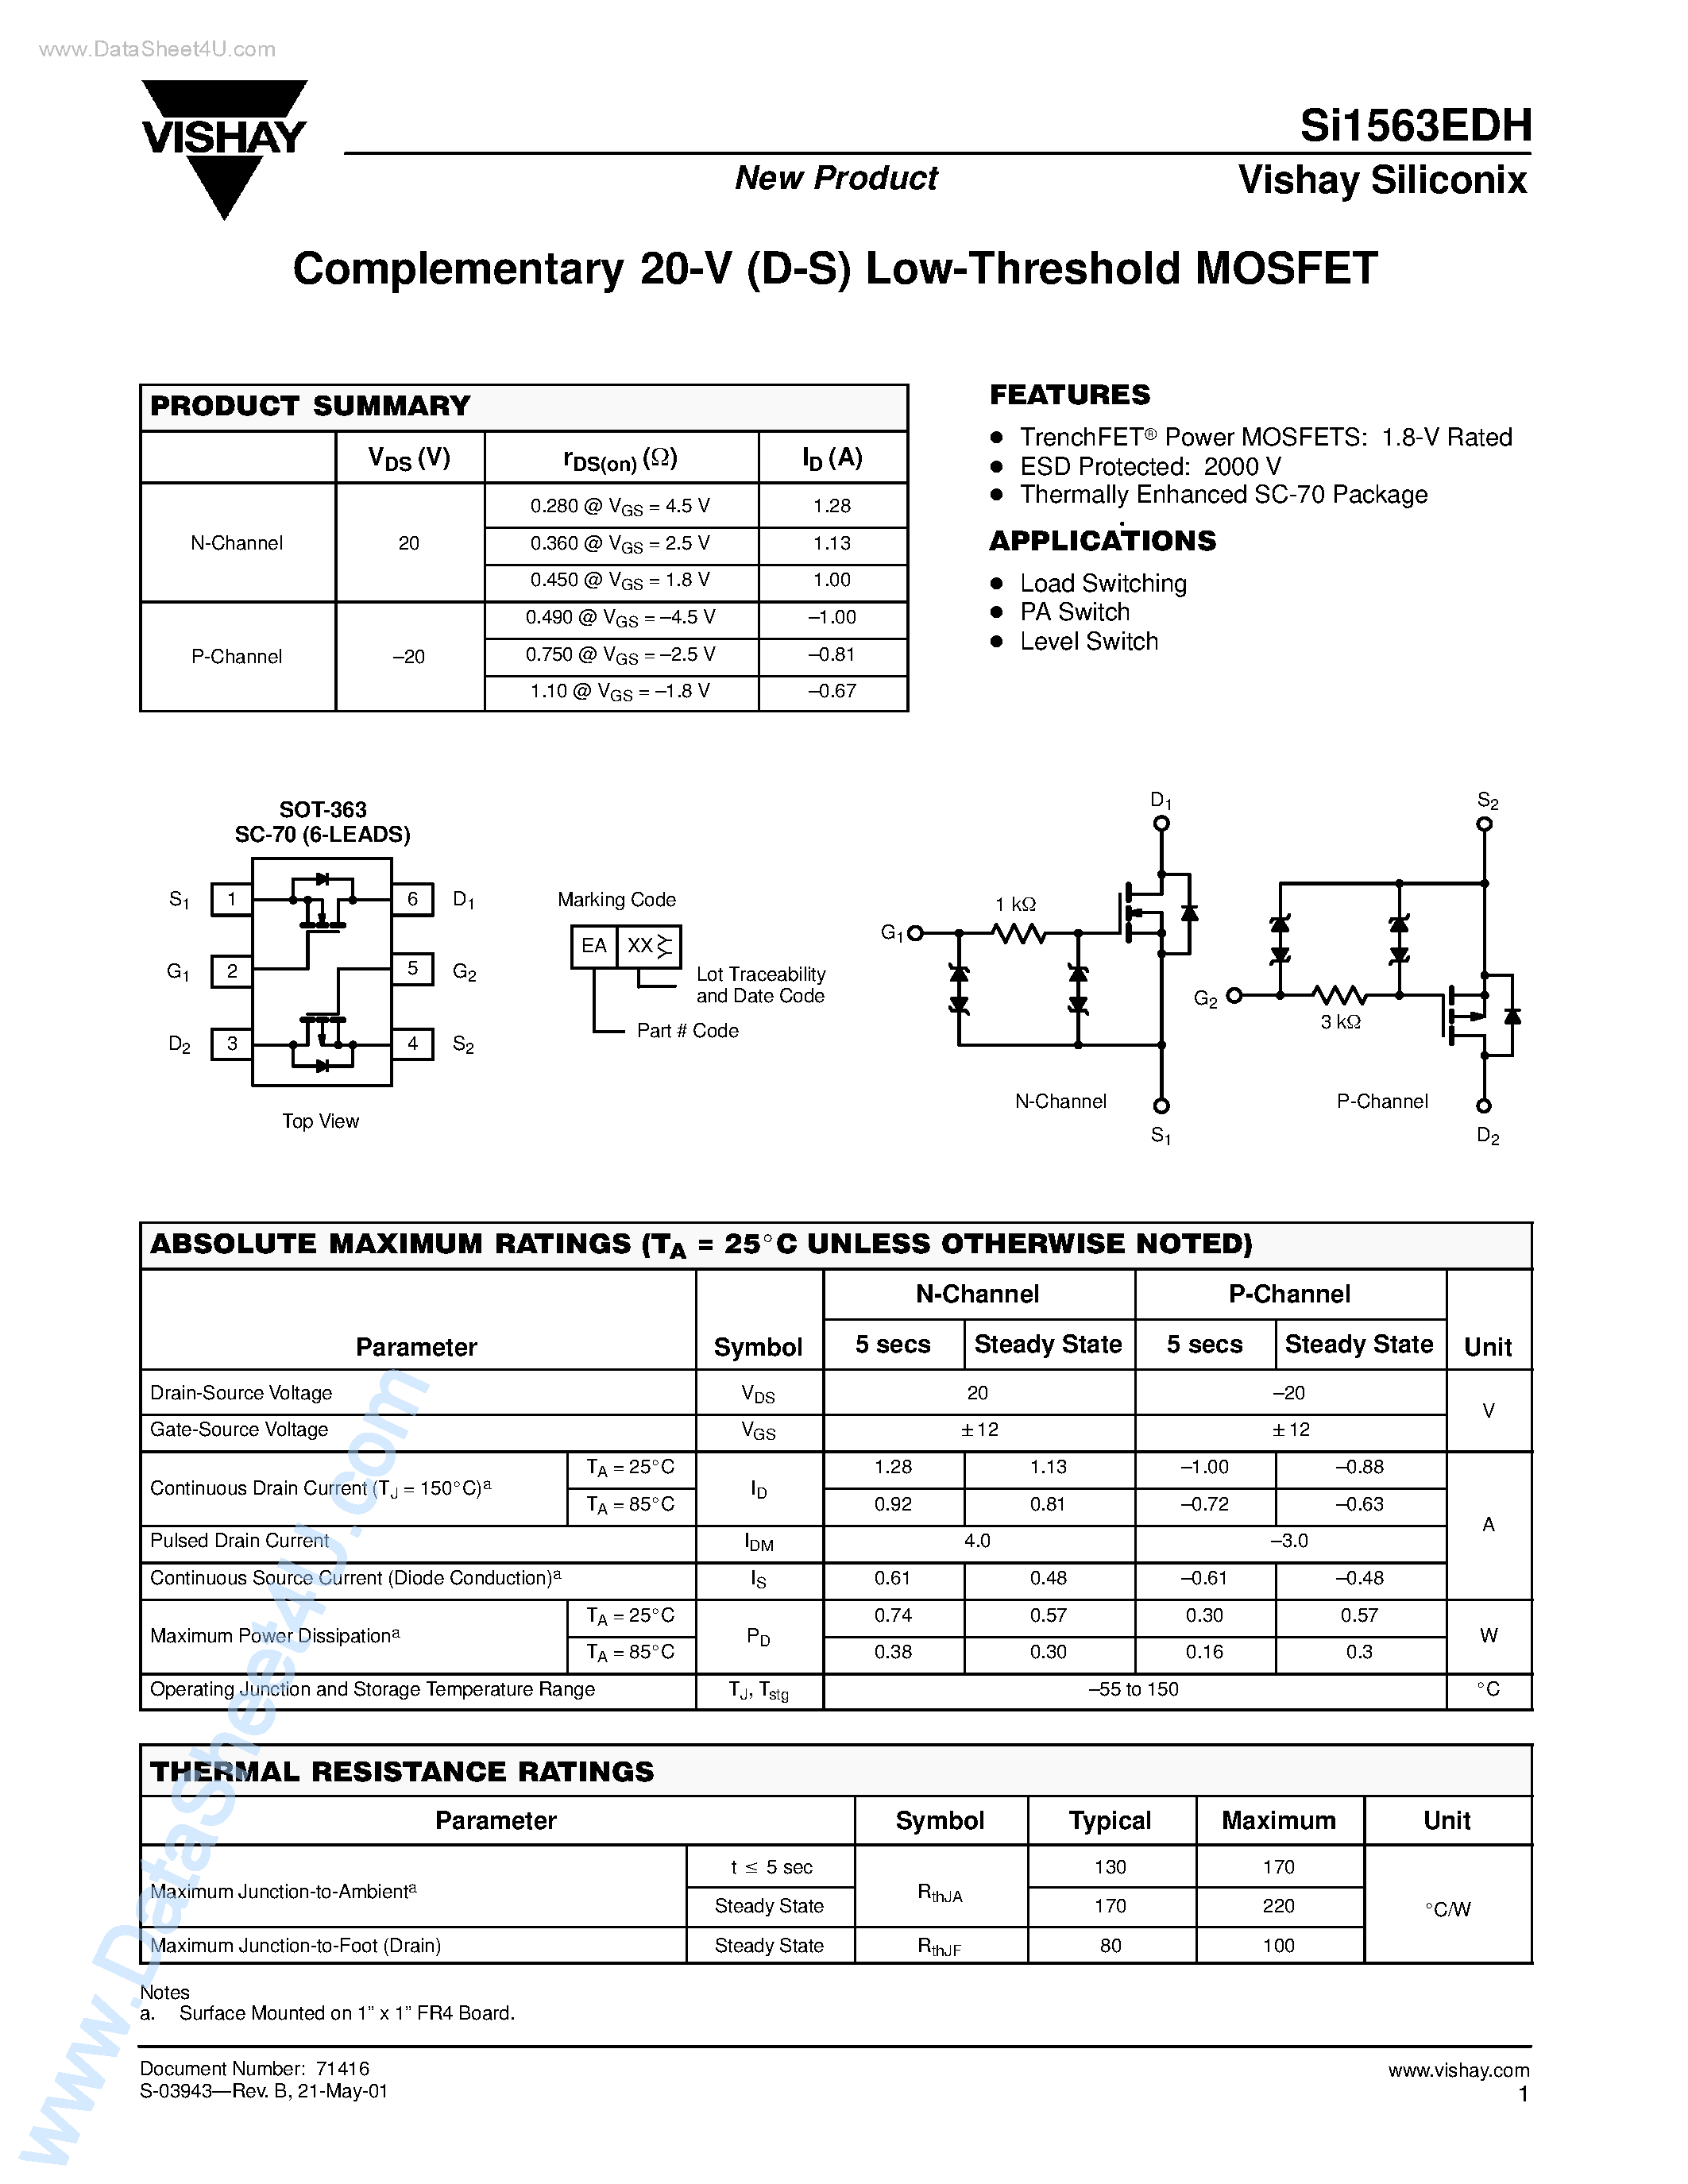 Даташит SI1563EDH - Complementary 20-V (D-S) Low-Threshold MOSFET страница 1